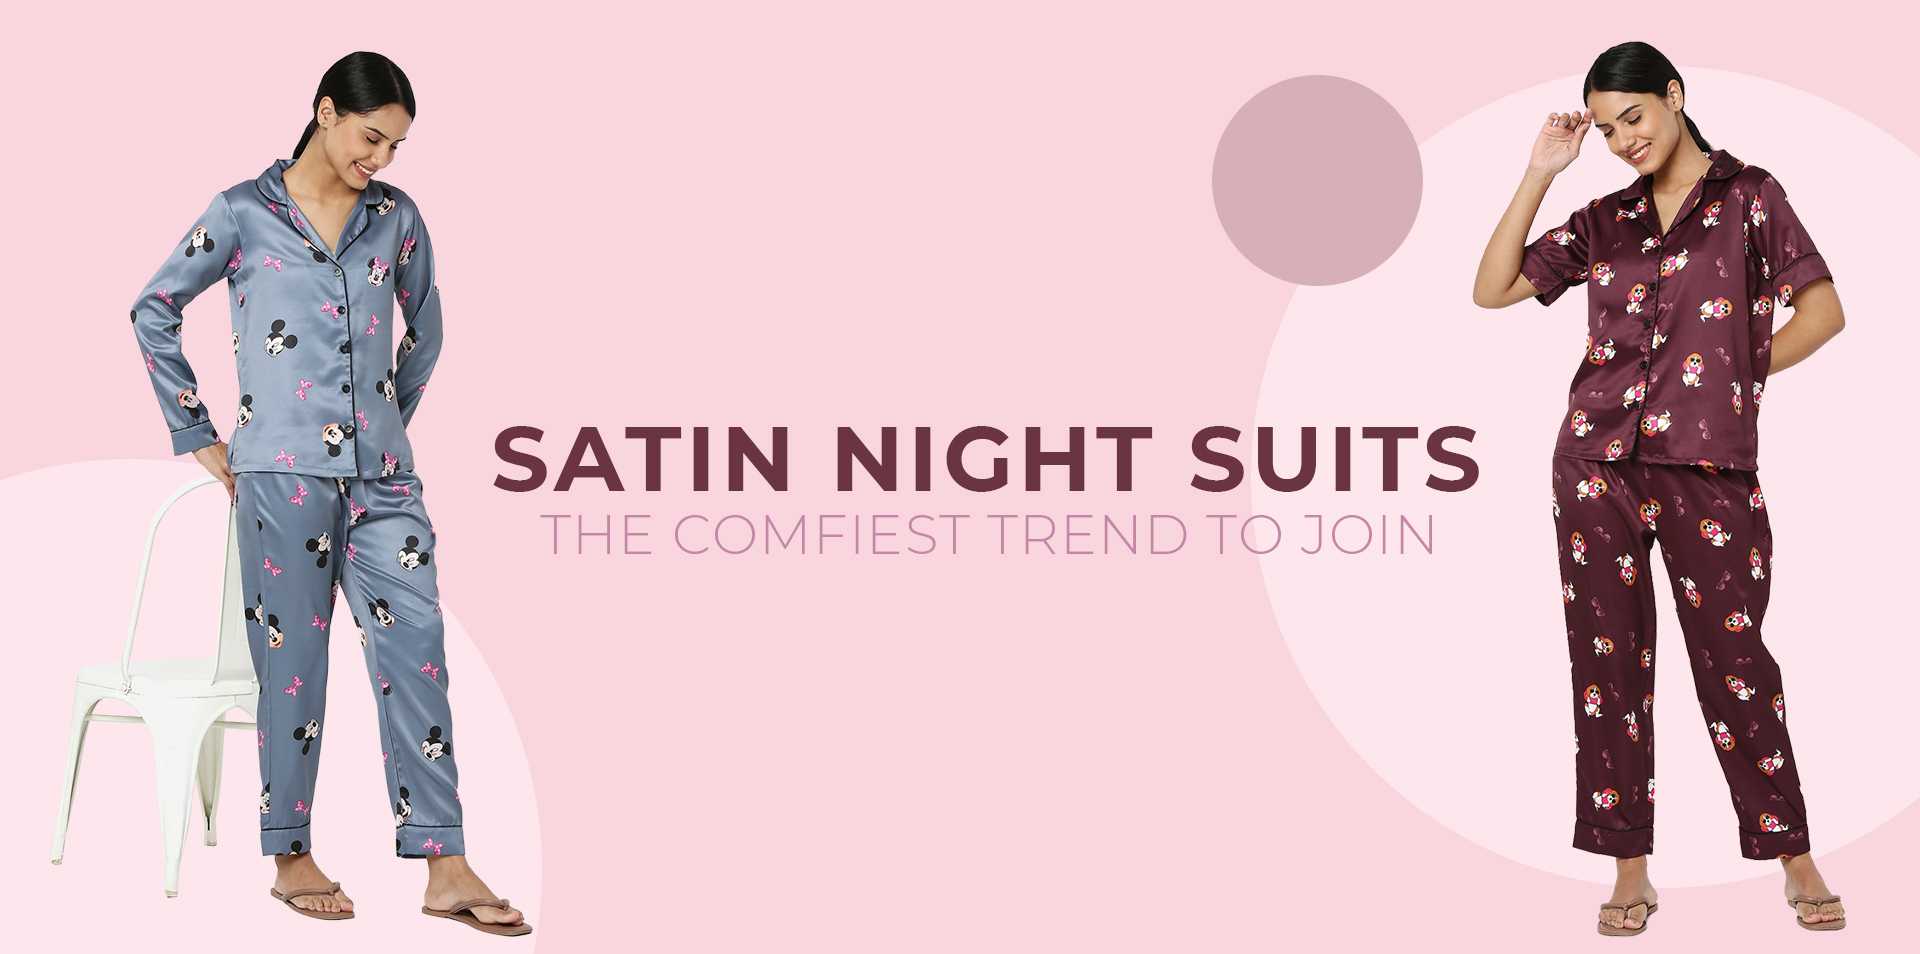 Satin Night Suits - The Comfiest Trend to Join